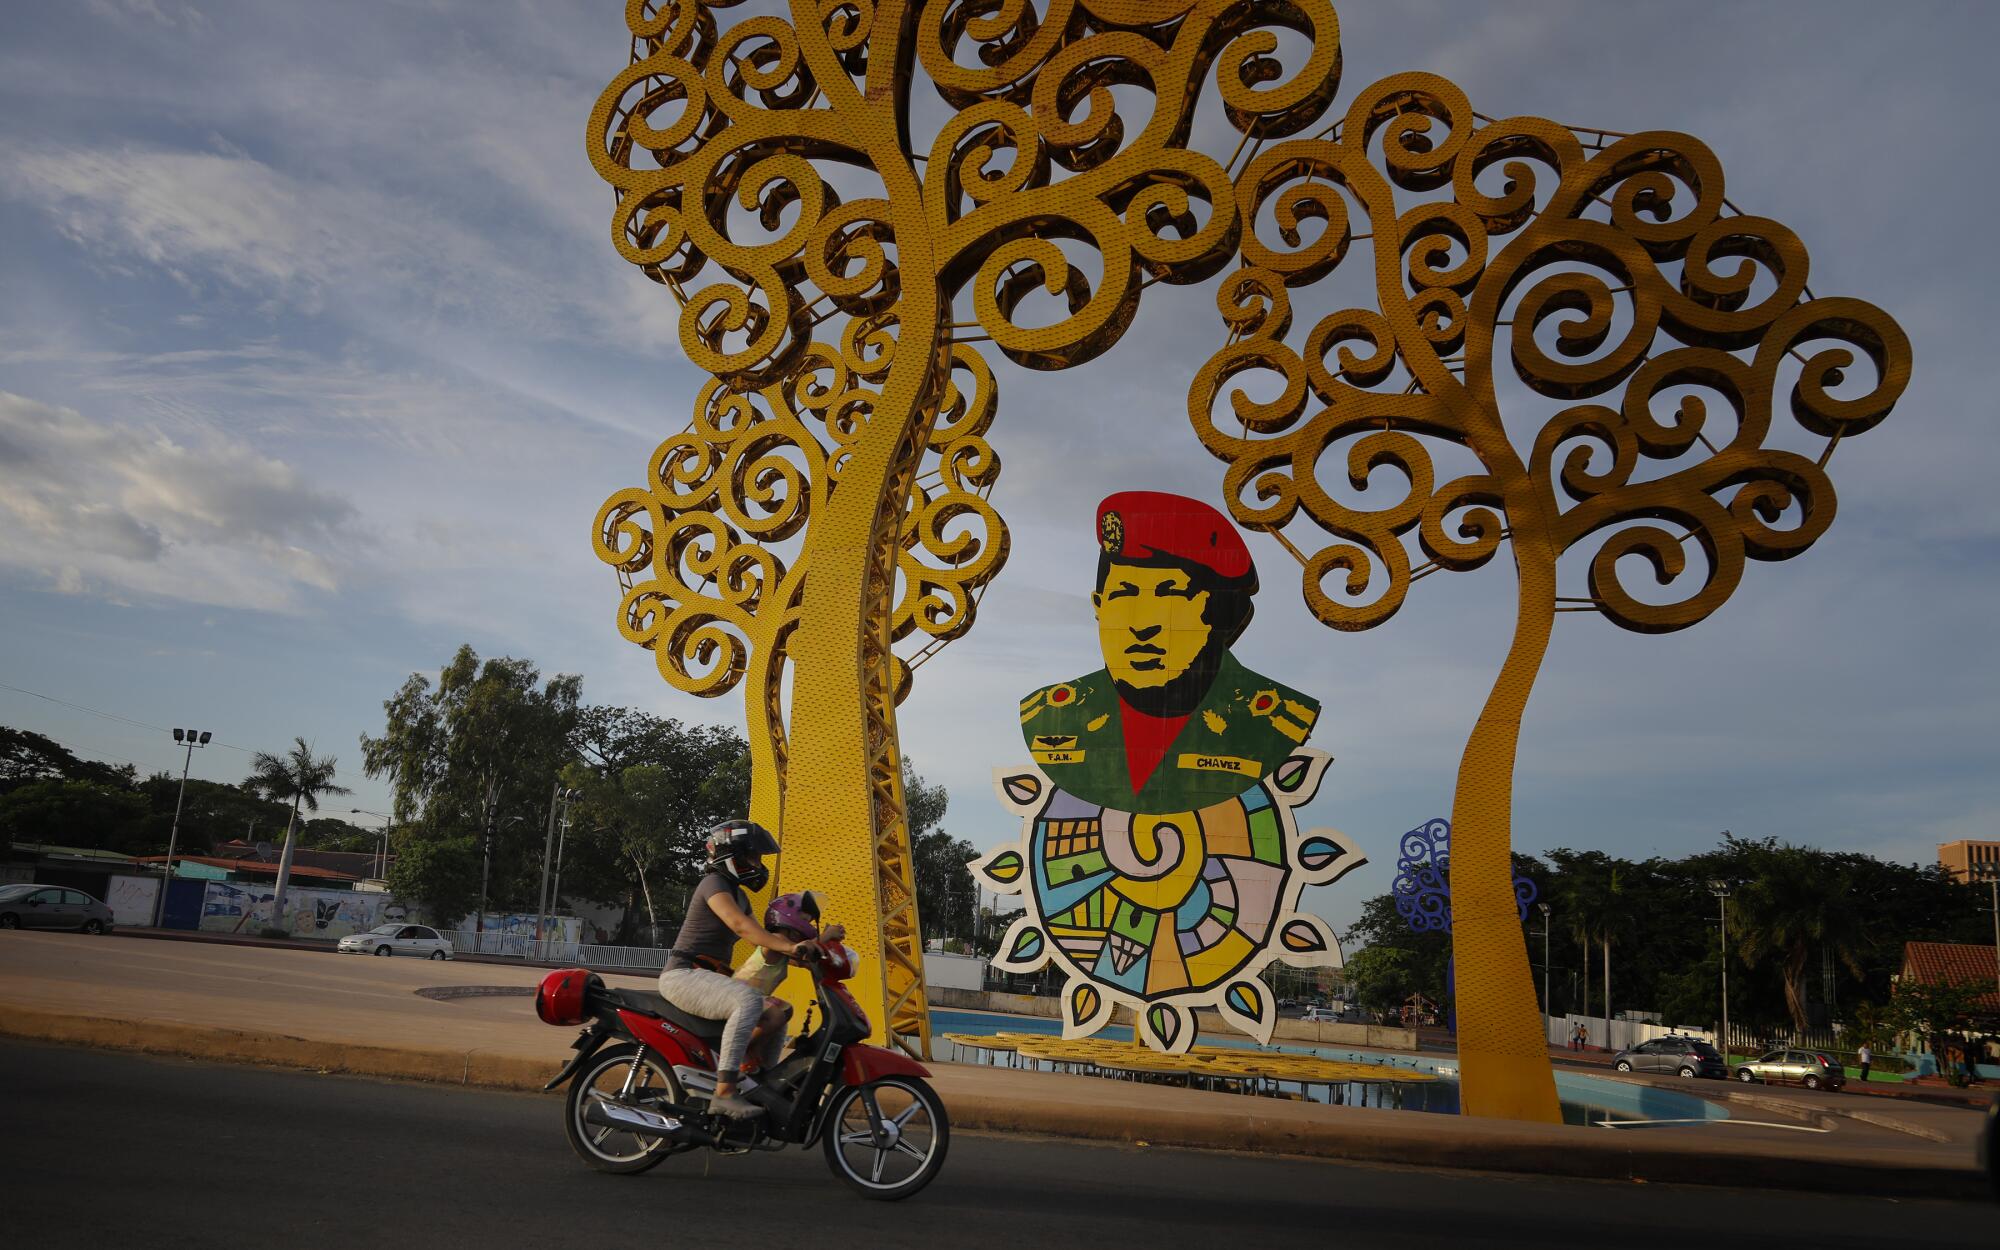 Part of the Trees of Life art installation surrounds a tribute to Hugo Chávez in a traffic circle in Managua